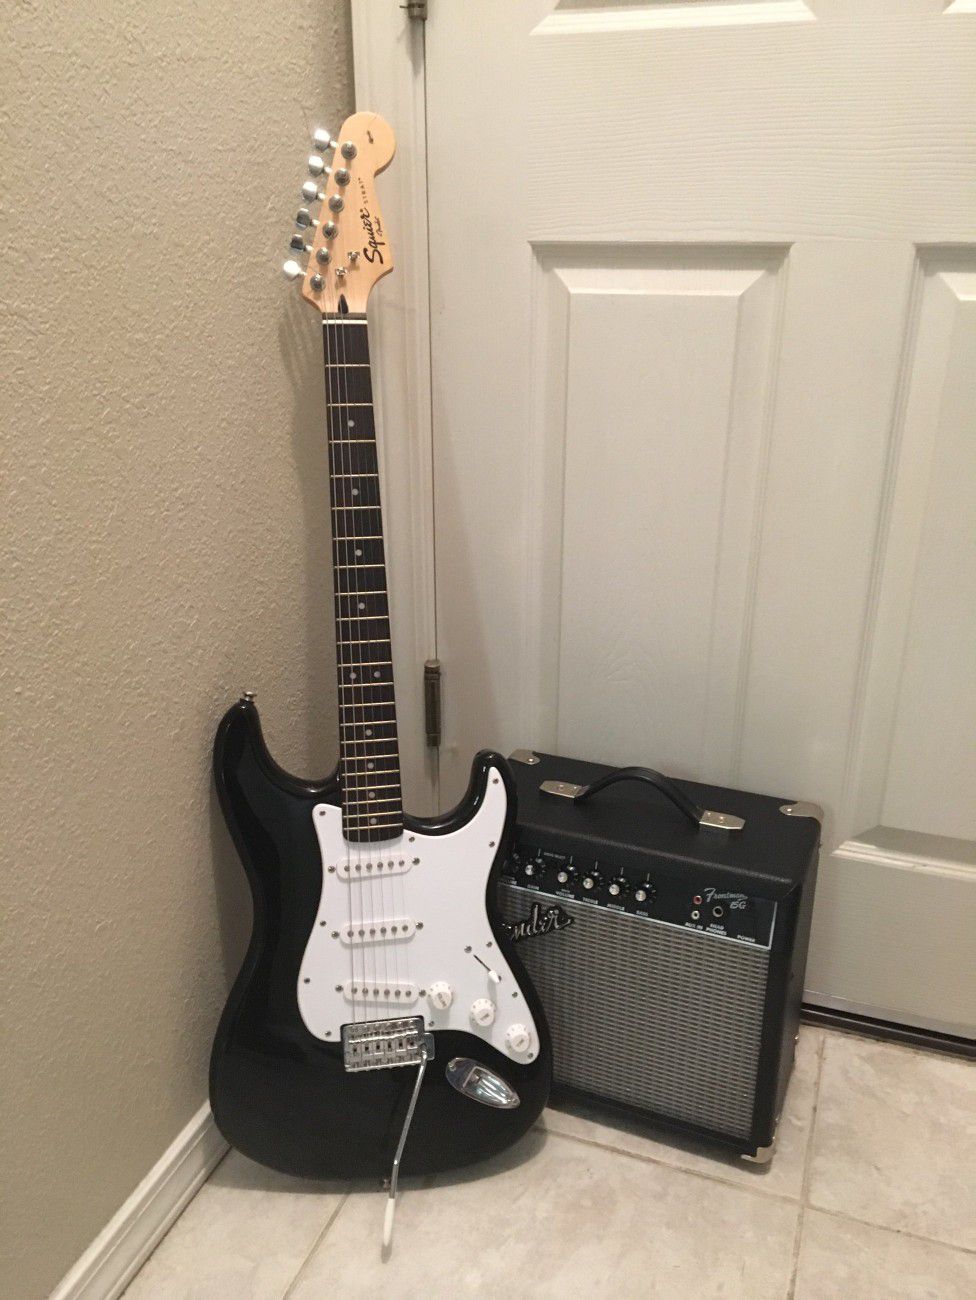 Fender Squire and Amp